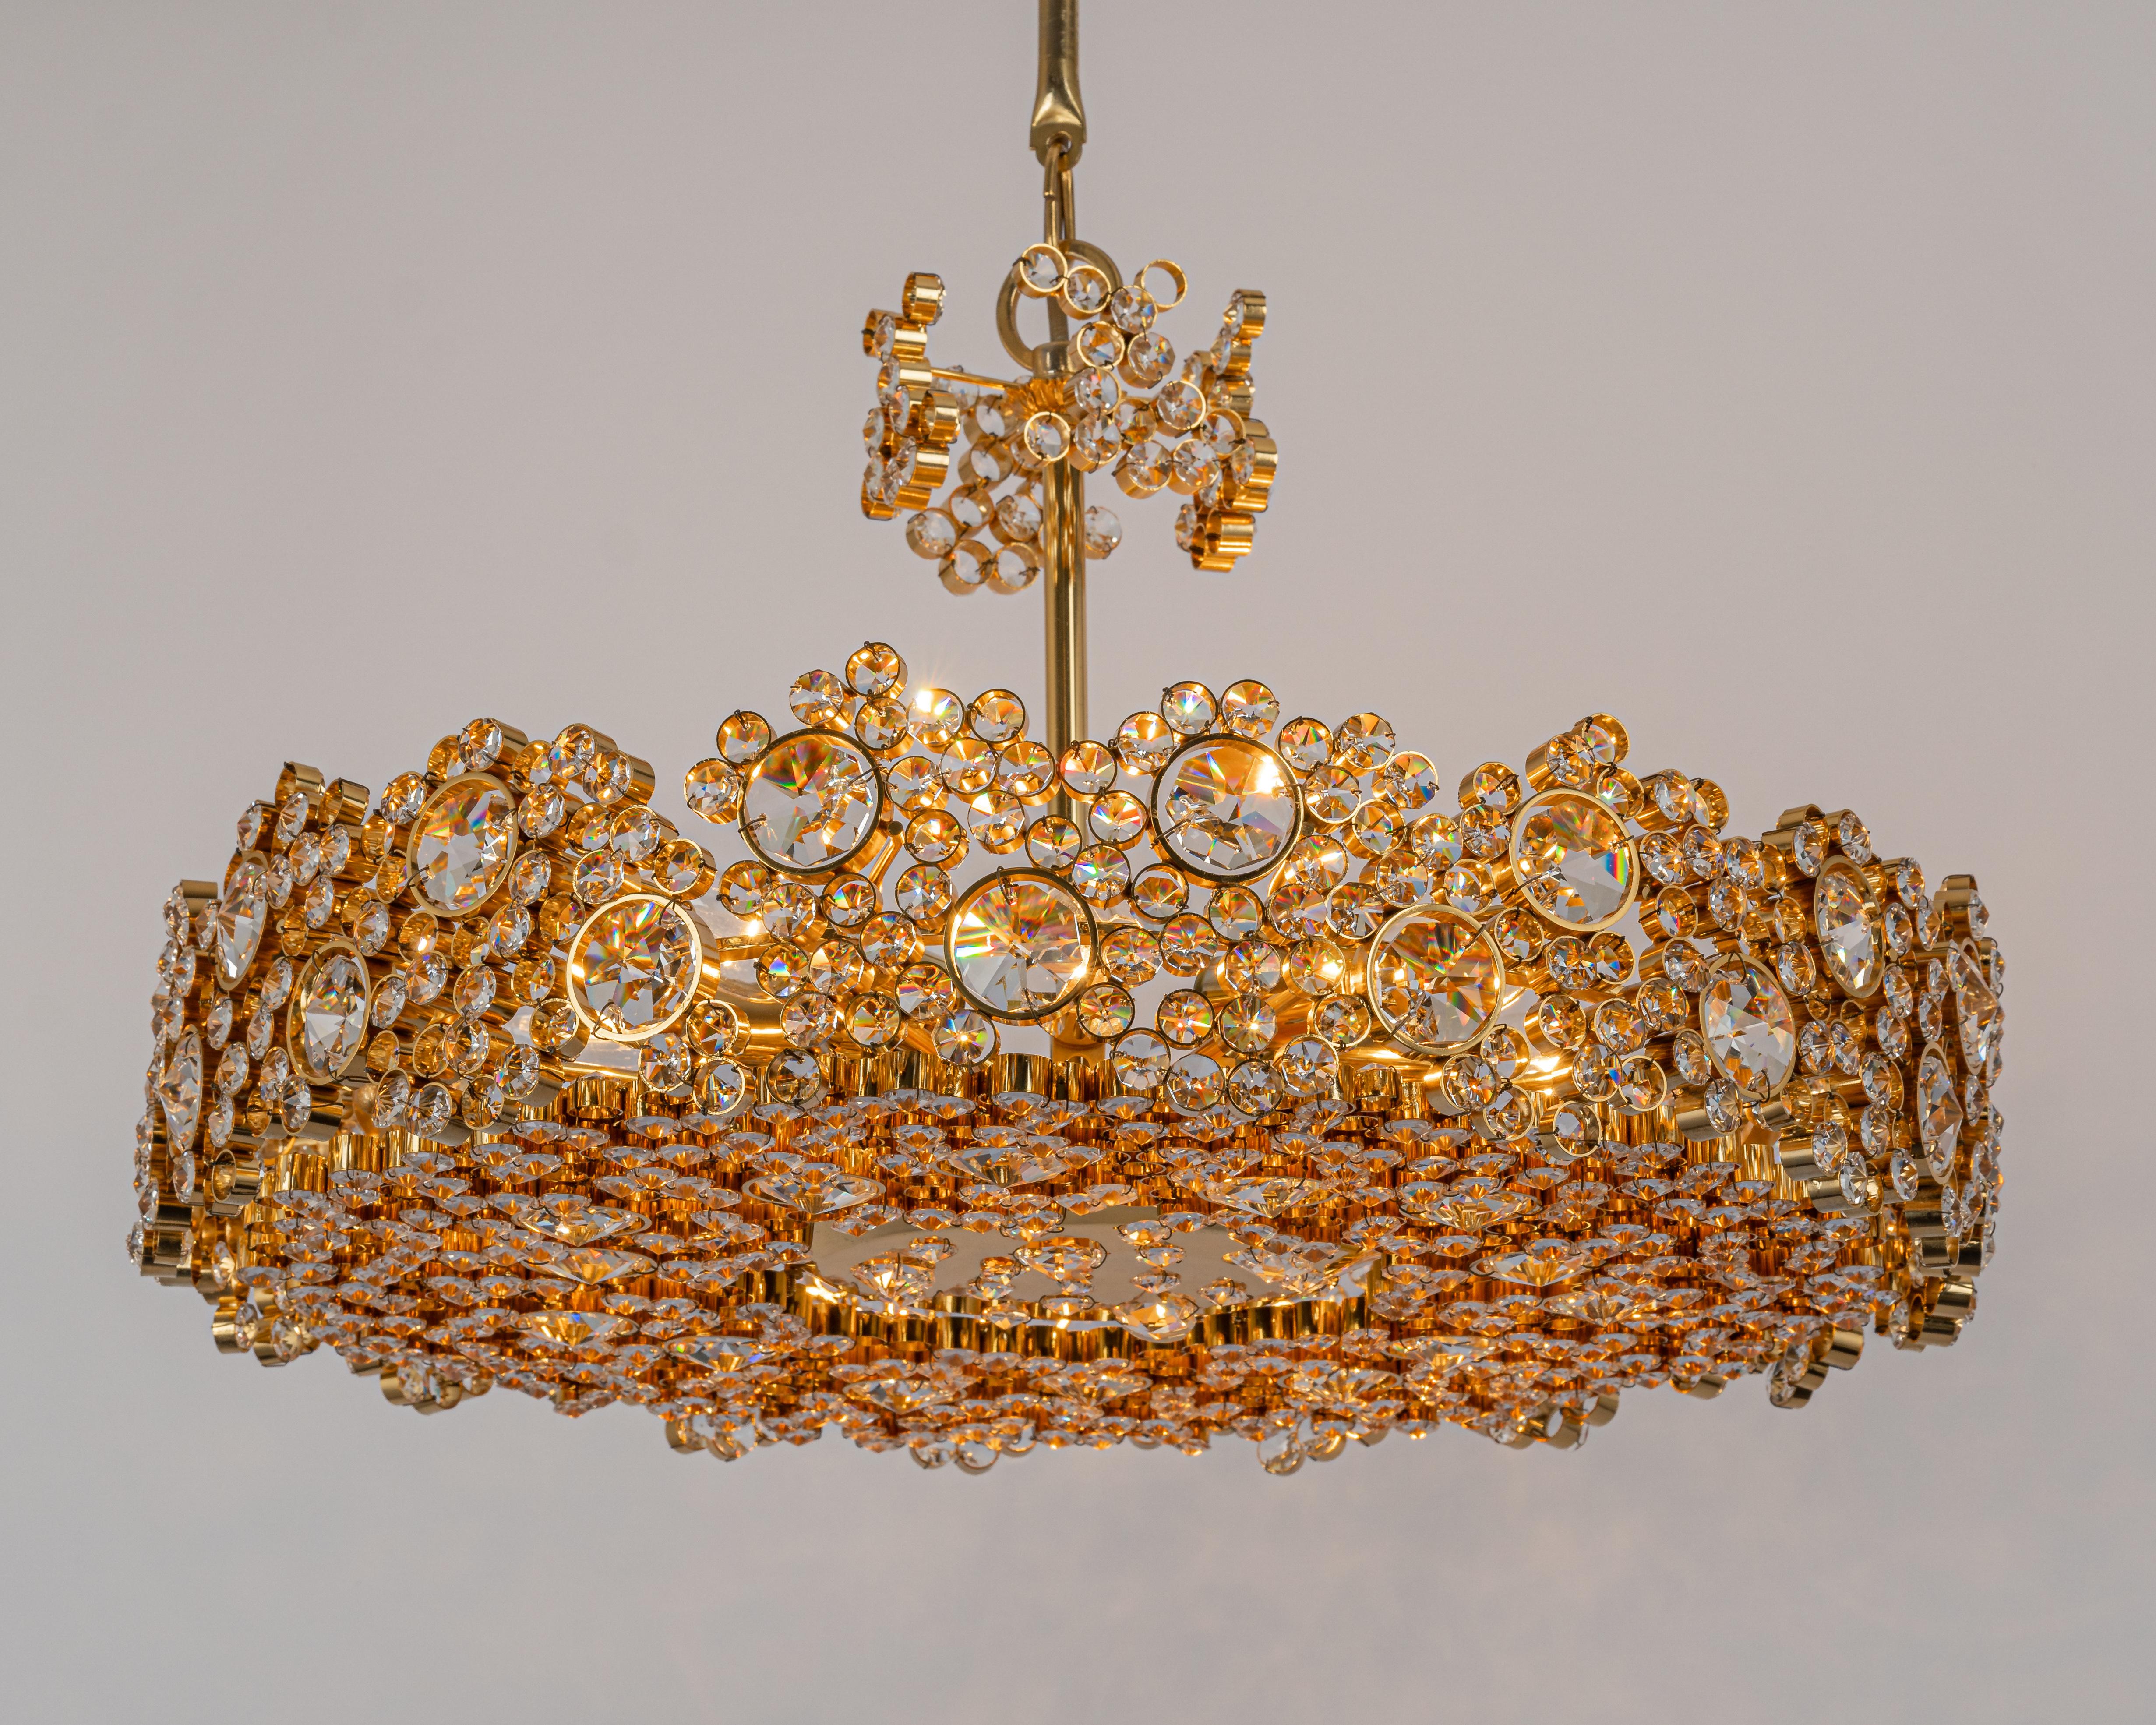 Gilt Brass and Crystal Glass Encrusted Chandeliers by Palwa, Germany, 1970s For Sale 3